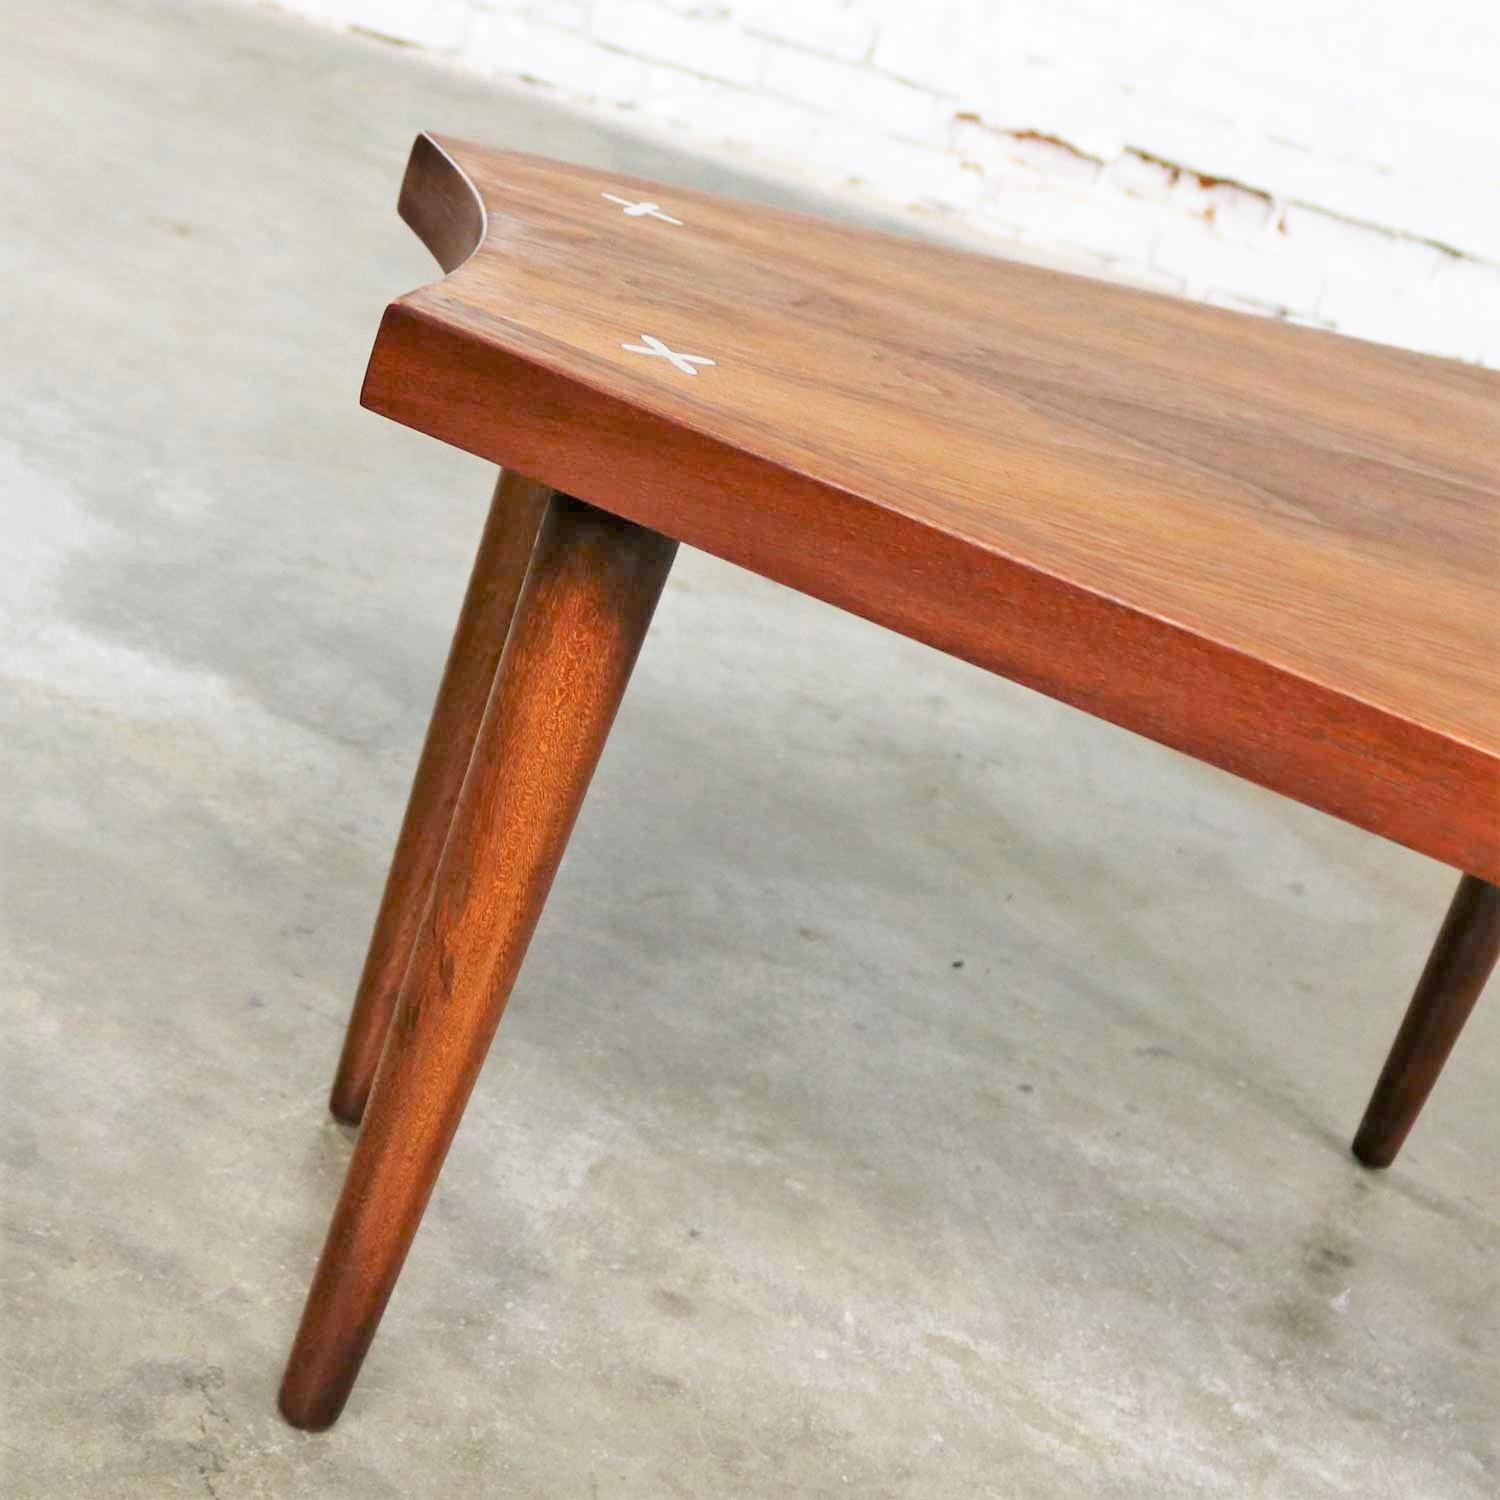 20th Century Walnut Wedge Shape End Table Attributed to Merton Gershun for American of Martin